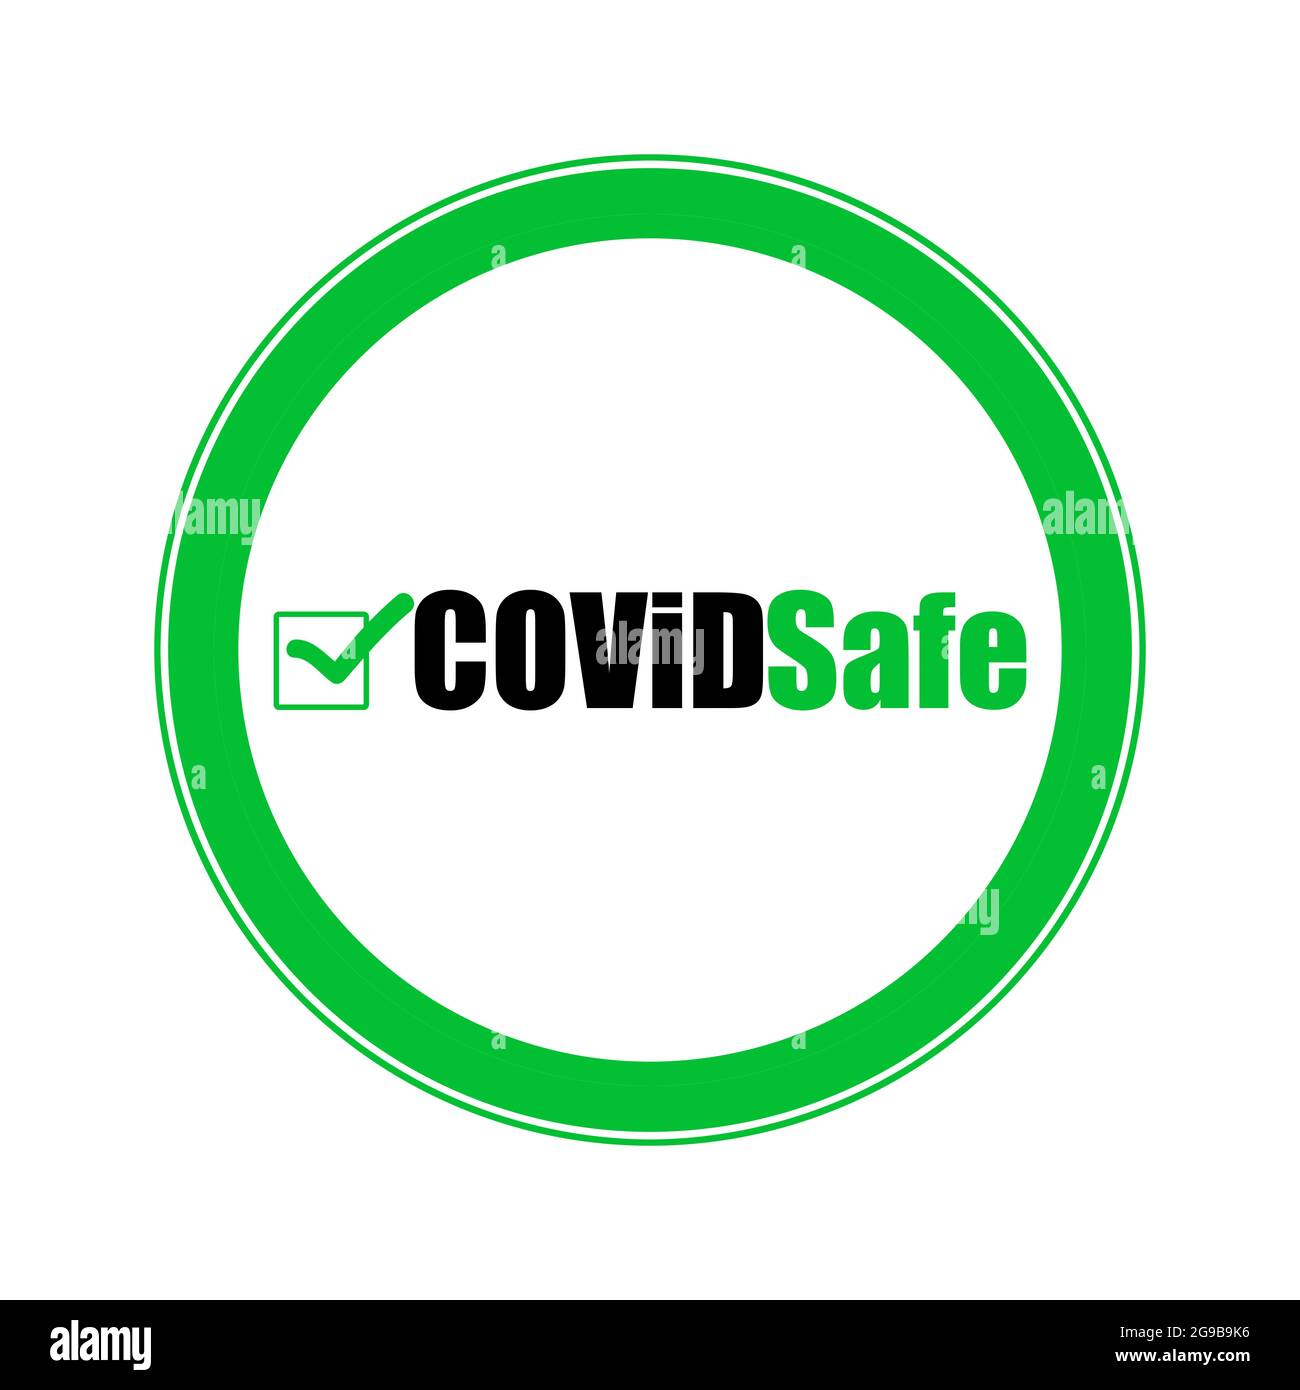 Coved Safe Sticker Button Sign Poster, For Businesses marketing Poster and blog posts. Return to Normal Health conduction Concept -. Covid-19 Safety Stock Photo